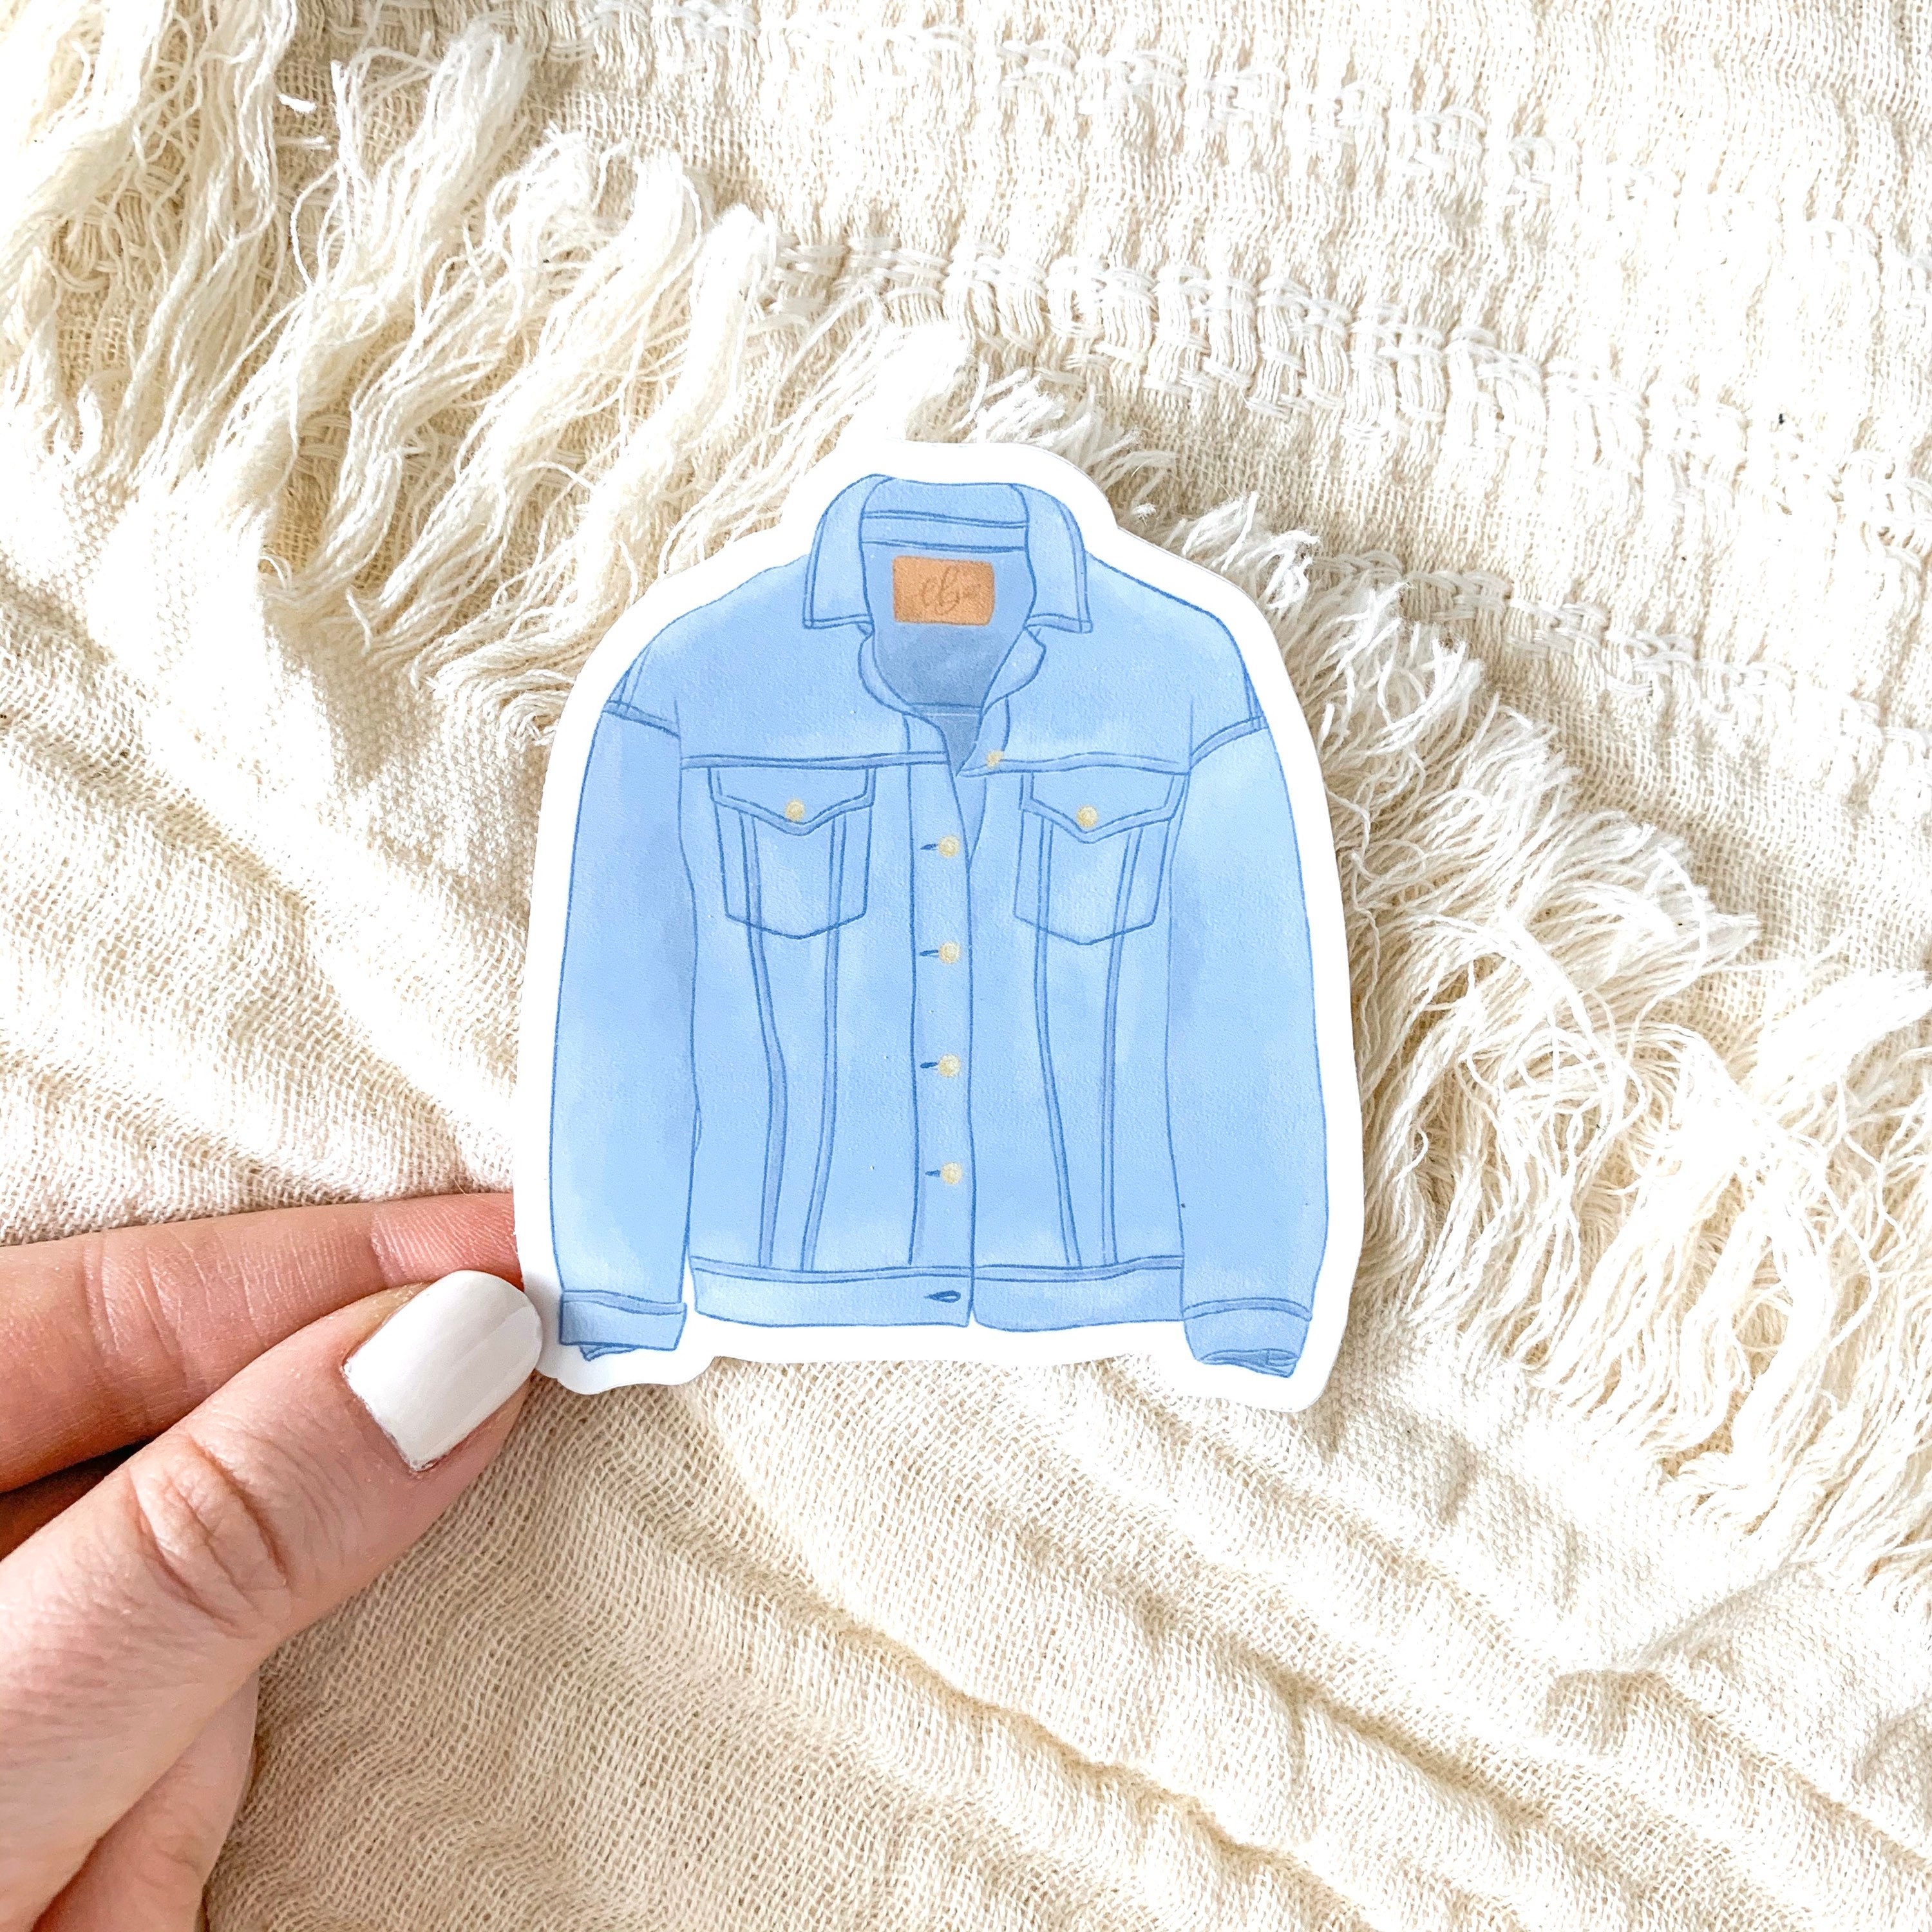 Girly Stickers – Blue Jean Boutique